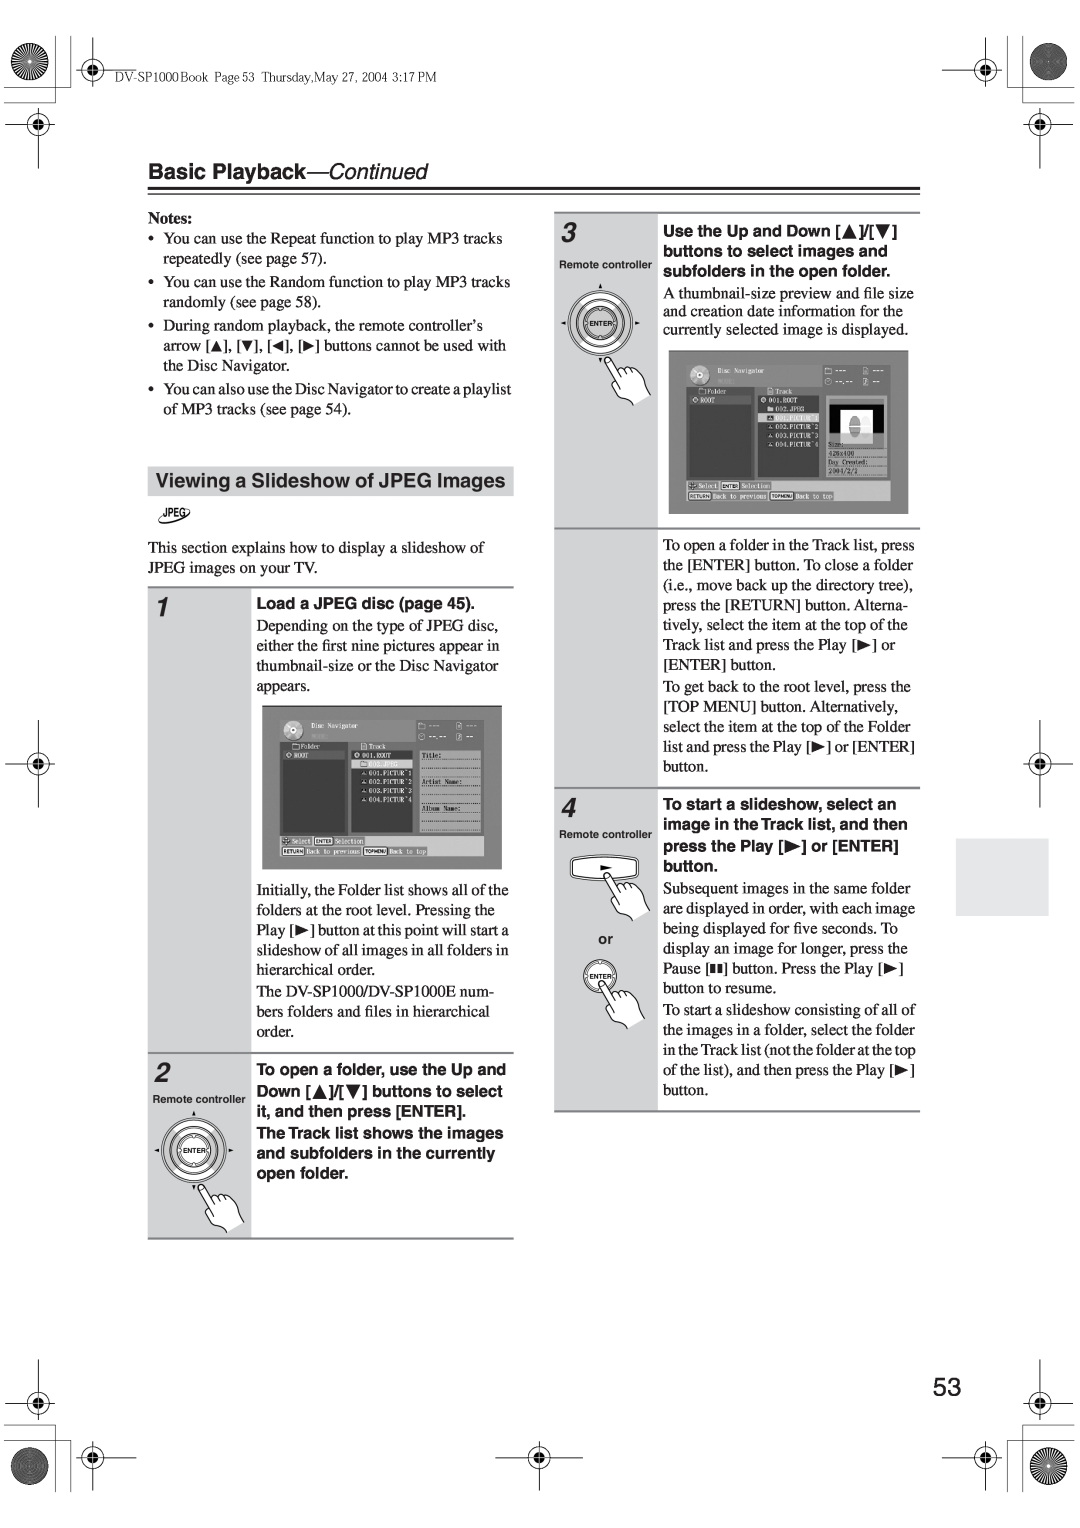 Onkyo DV-SP1000E instruction manual Viewing a Slideshow of JPEG Images, Basic Playback—Continued, Notes 